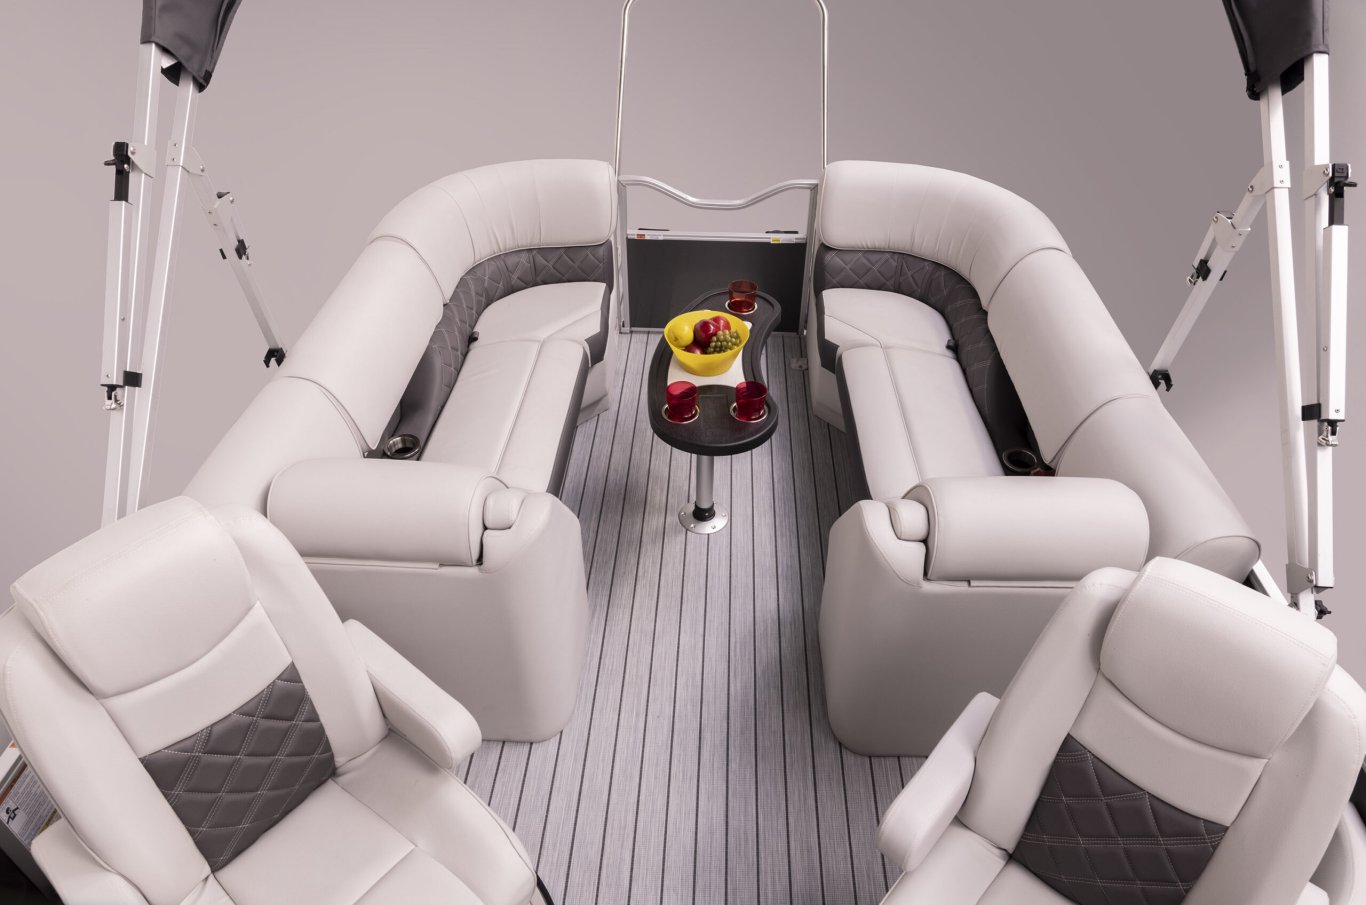 https://www.suncatcherpontoons.com/wp/wp-content/uploads/sites/2/2021/07/Elite-322-C-Lighted-Cup-Holders-in-Couch-Tan-Interior-scaled.jpg